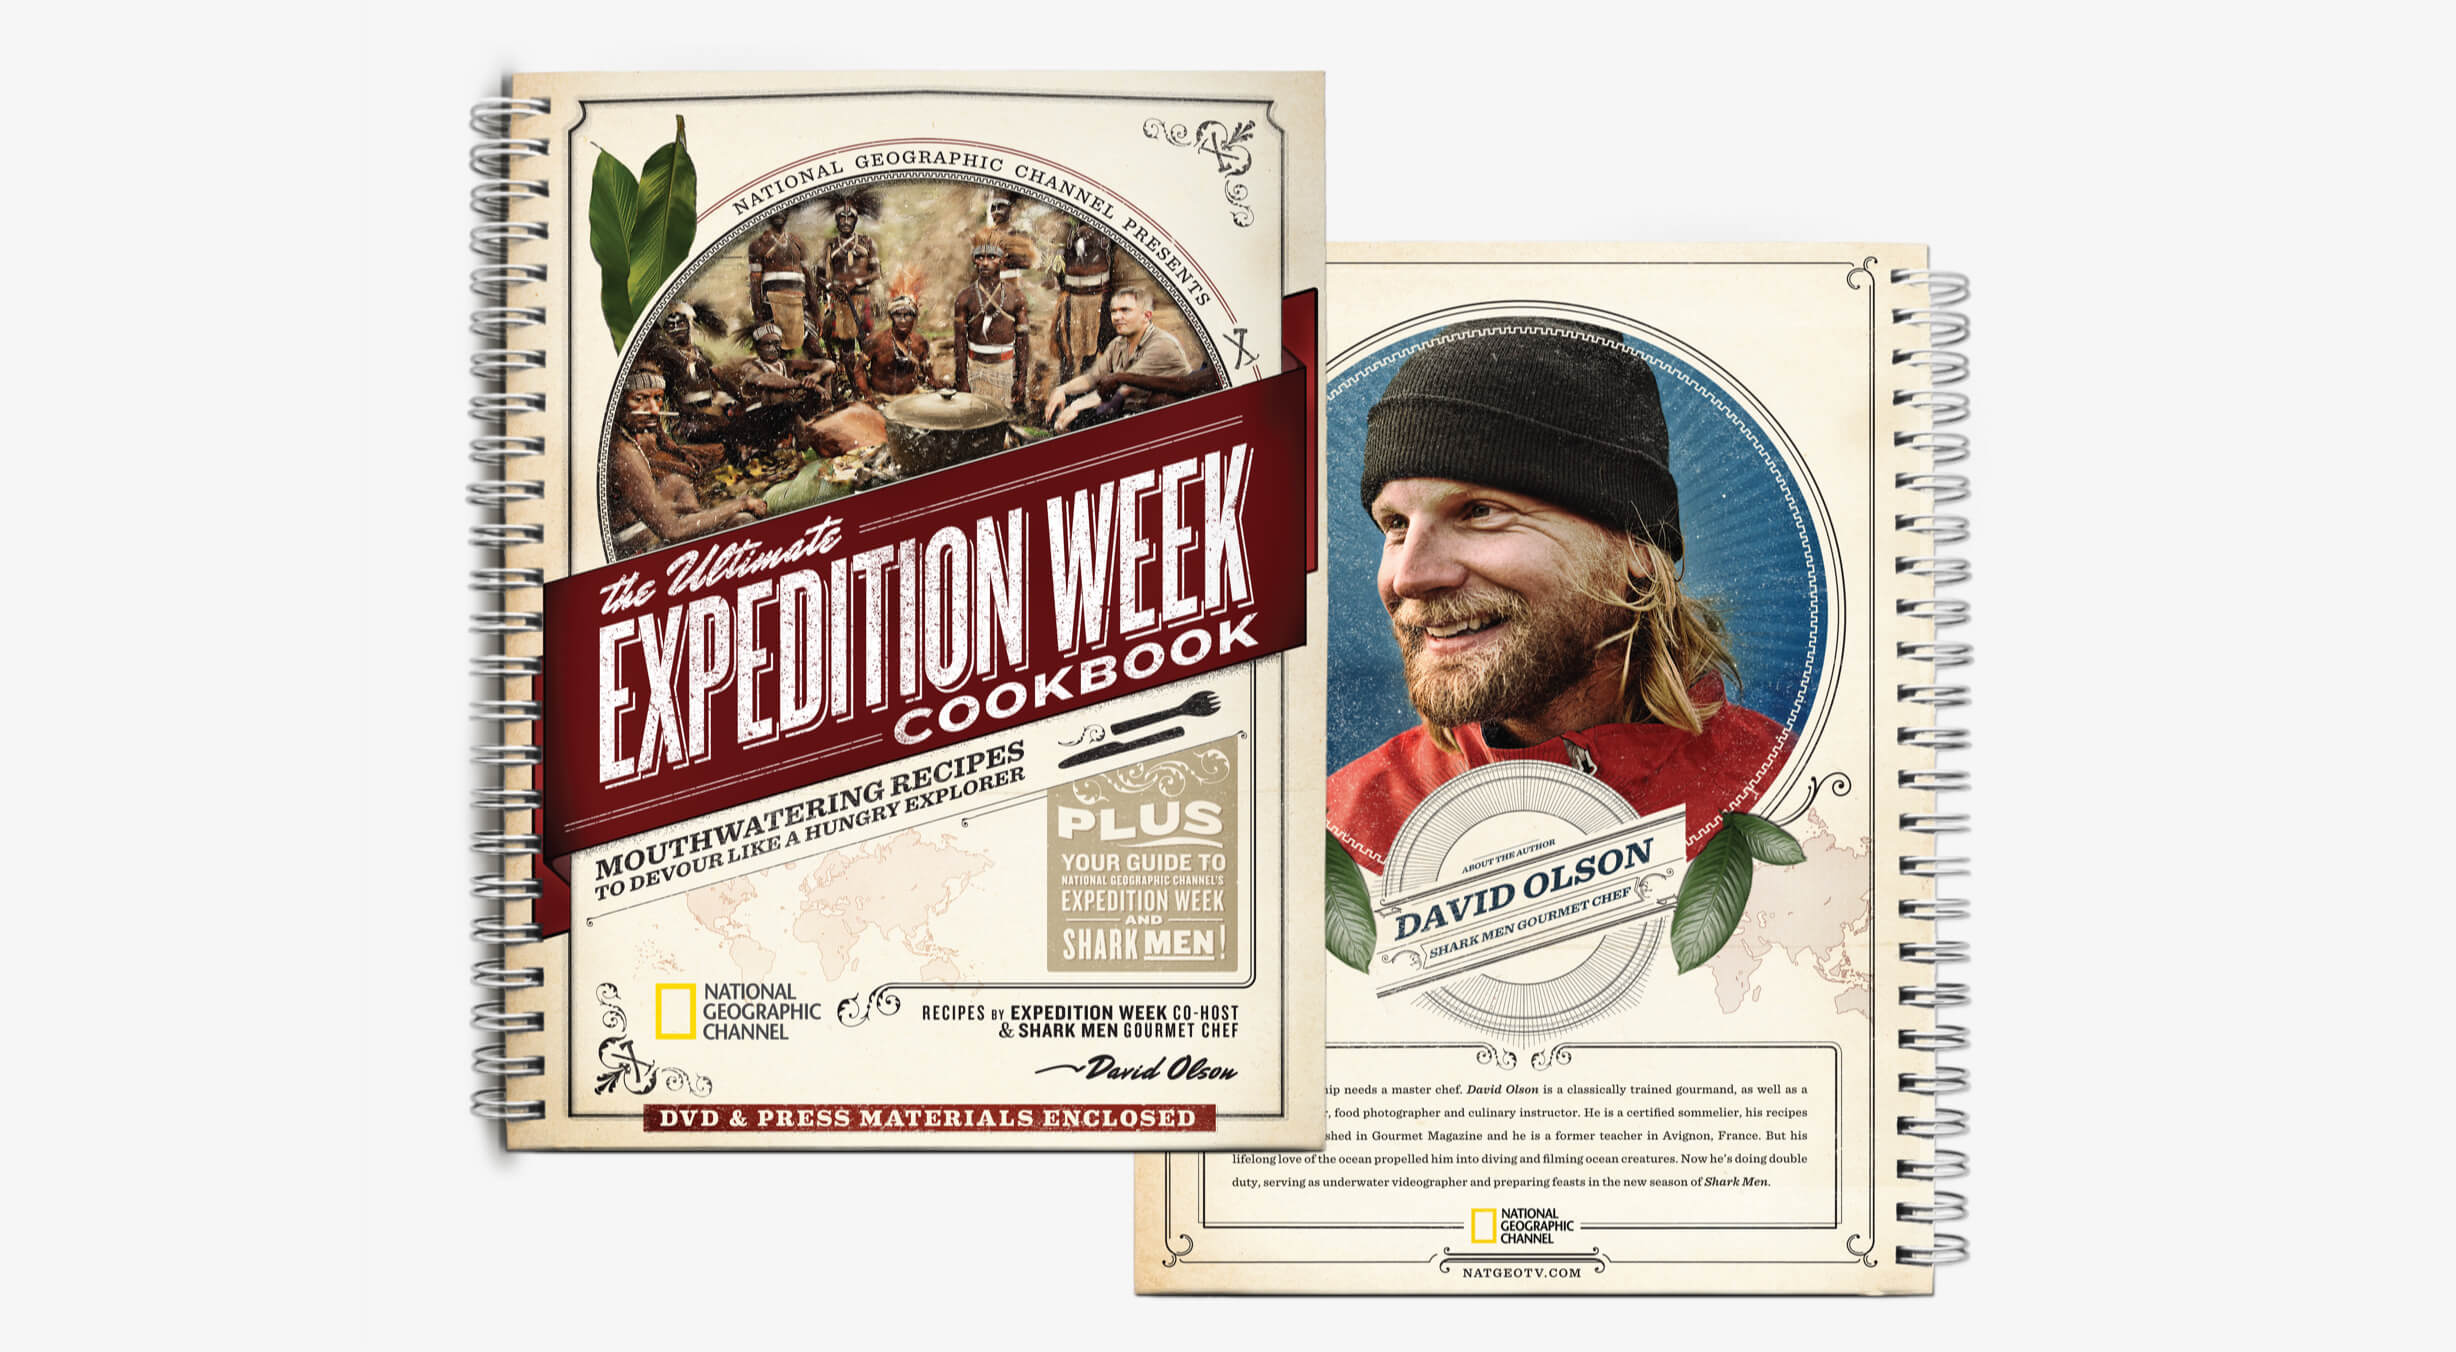 The Ultimate Expedition Week Cookbook cover and back cover publication design for National Geographic Channel, Washington, D.C.